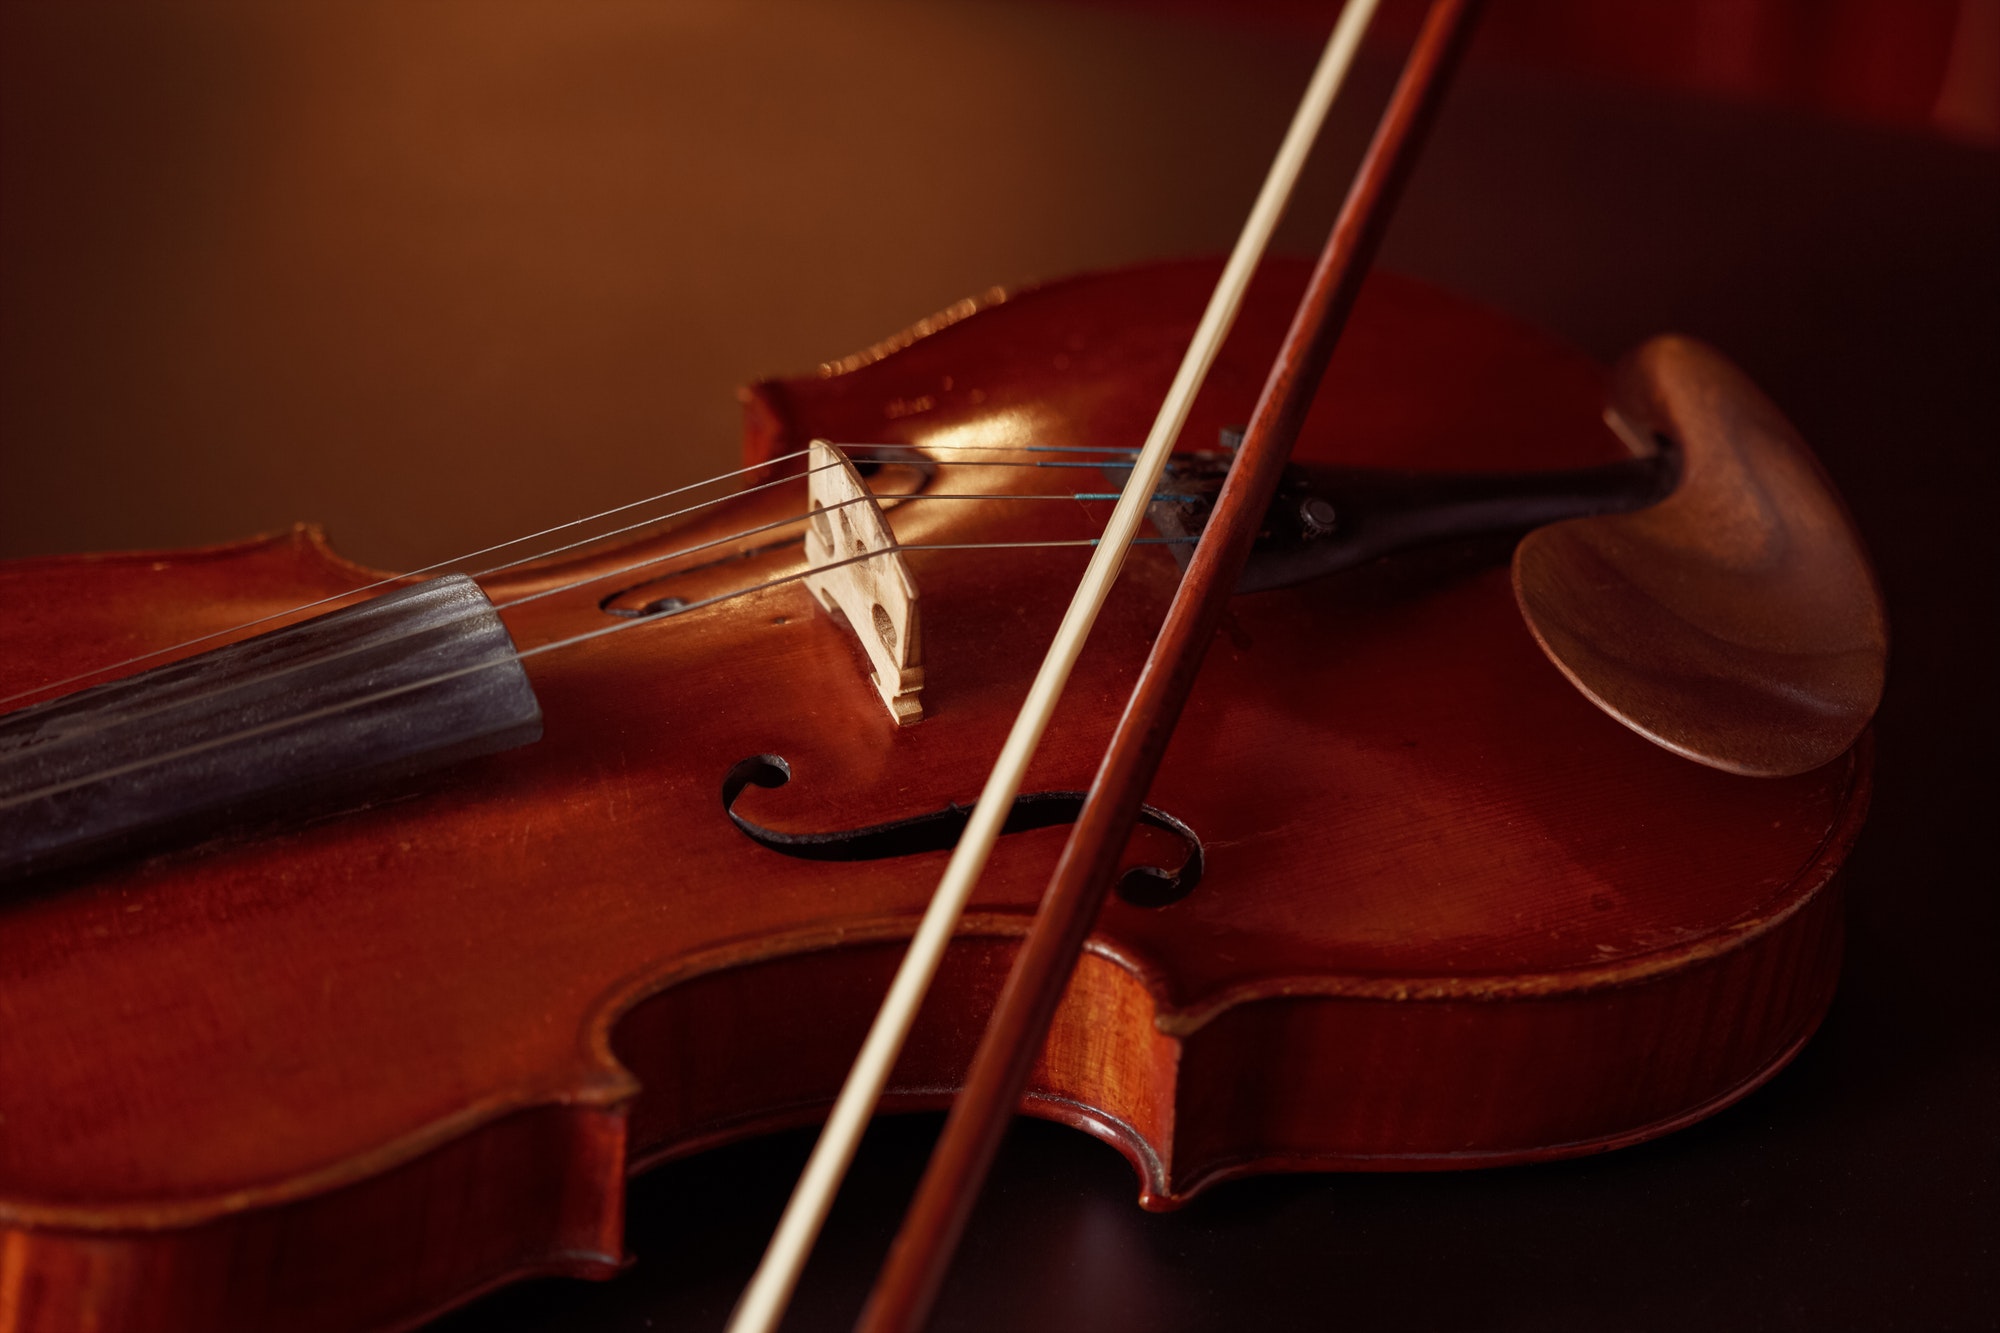 Violin in retro style and bow, closeup view